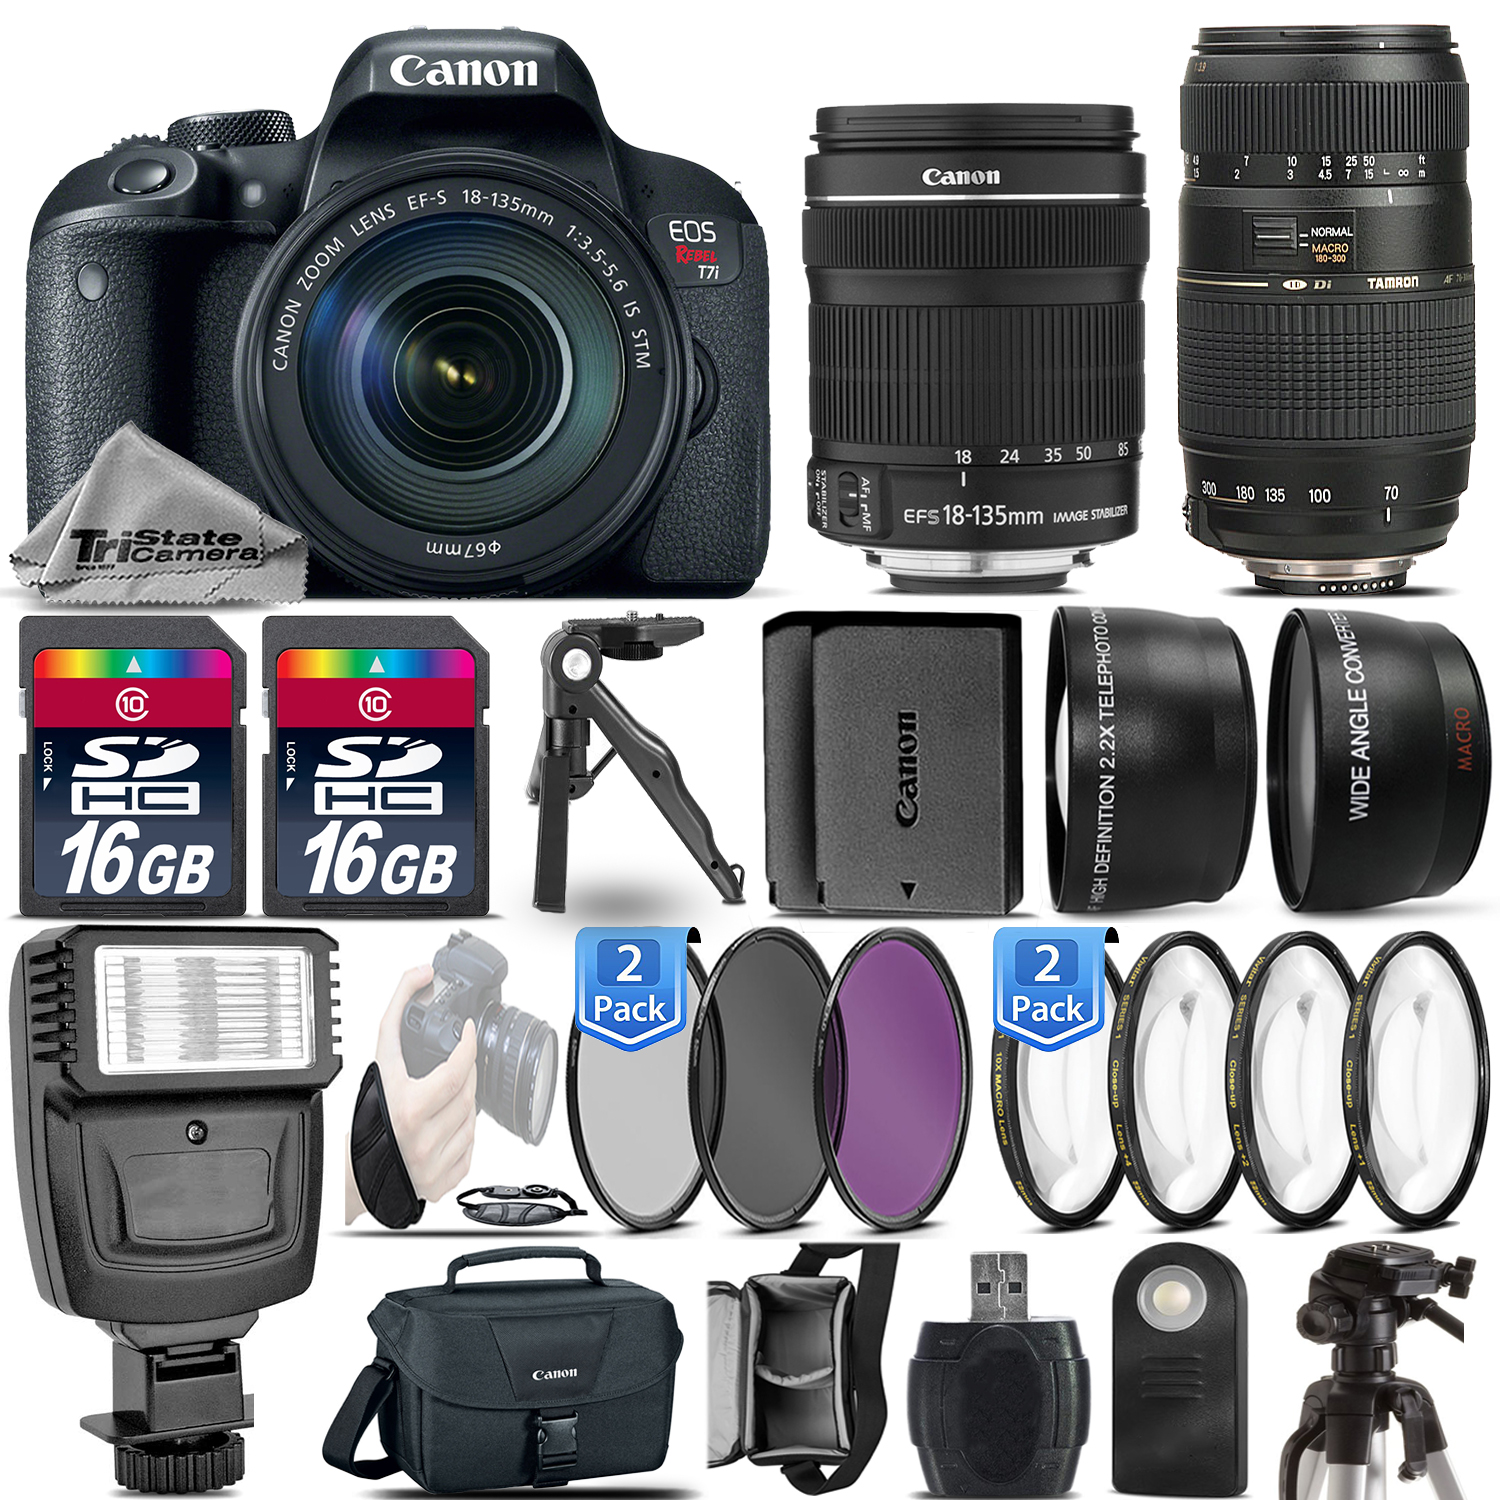 EOS Rebel T7i Camera + 18-135mm IS STM + 70-300mm +Extra Battery -32GB Kit *FREE SHIPPING*